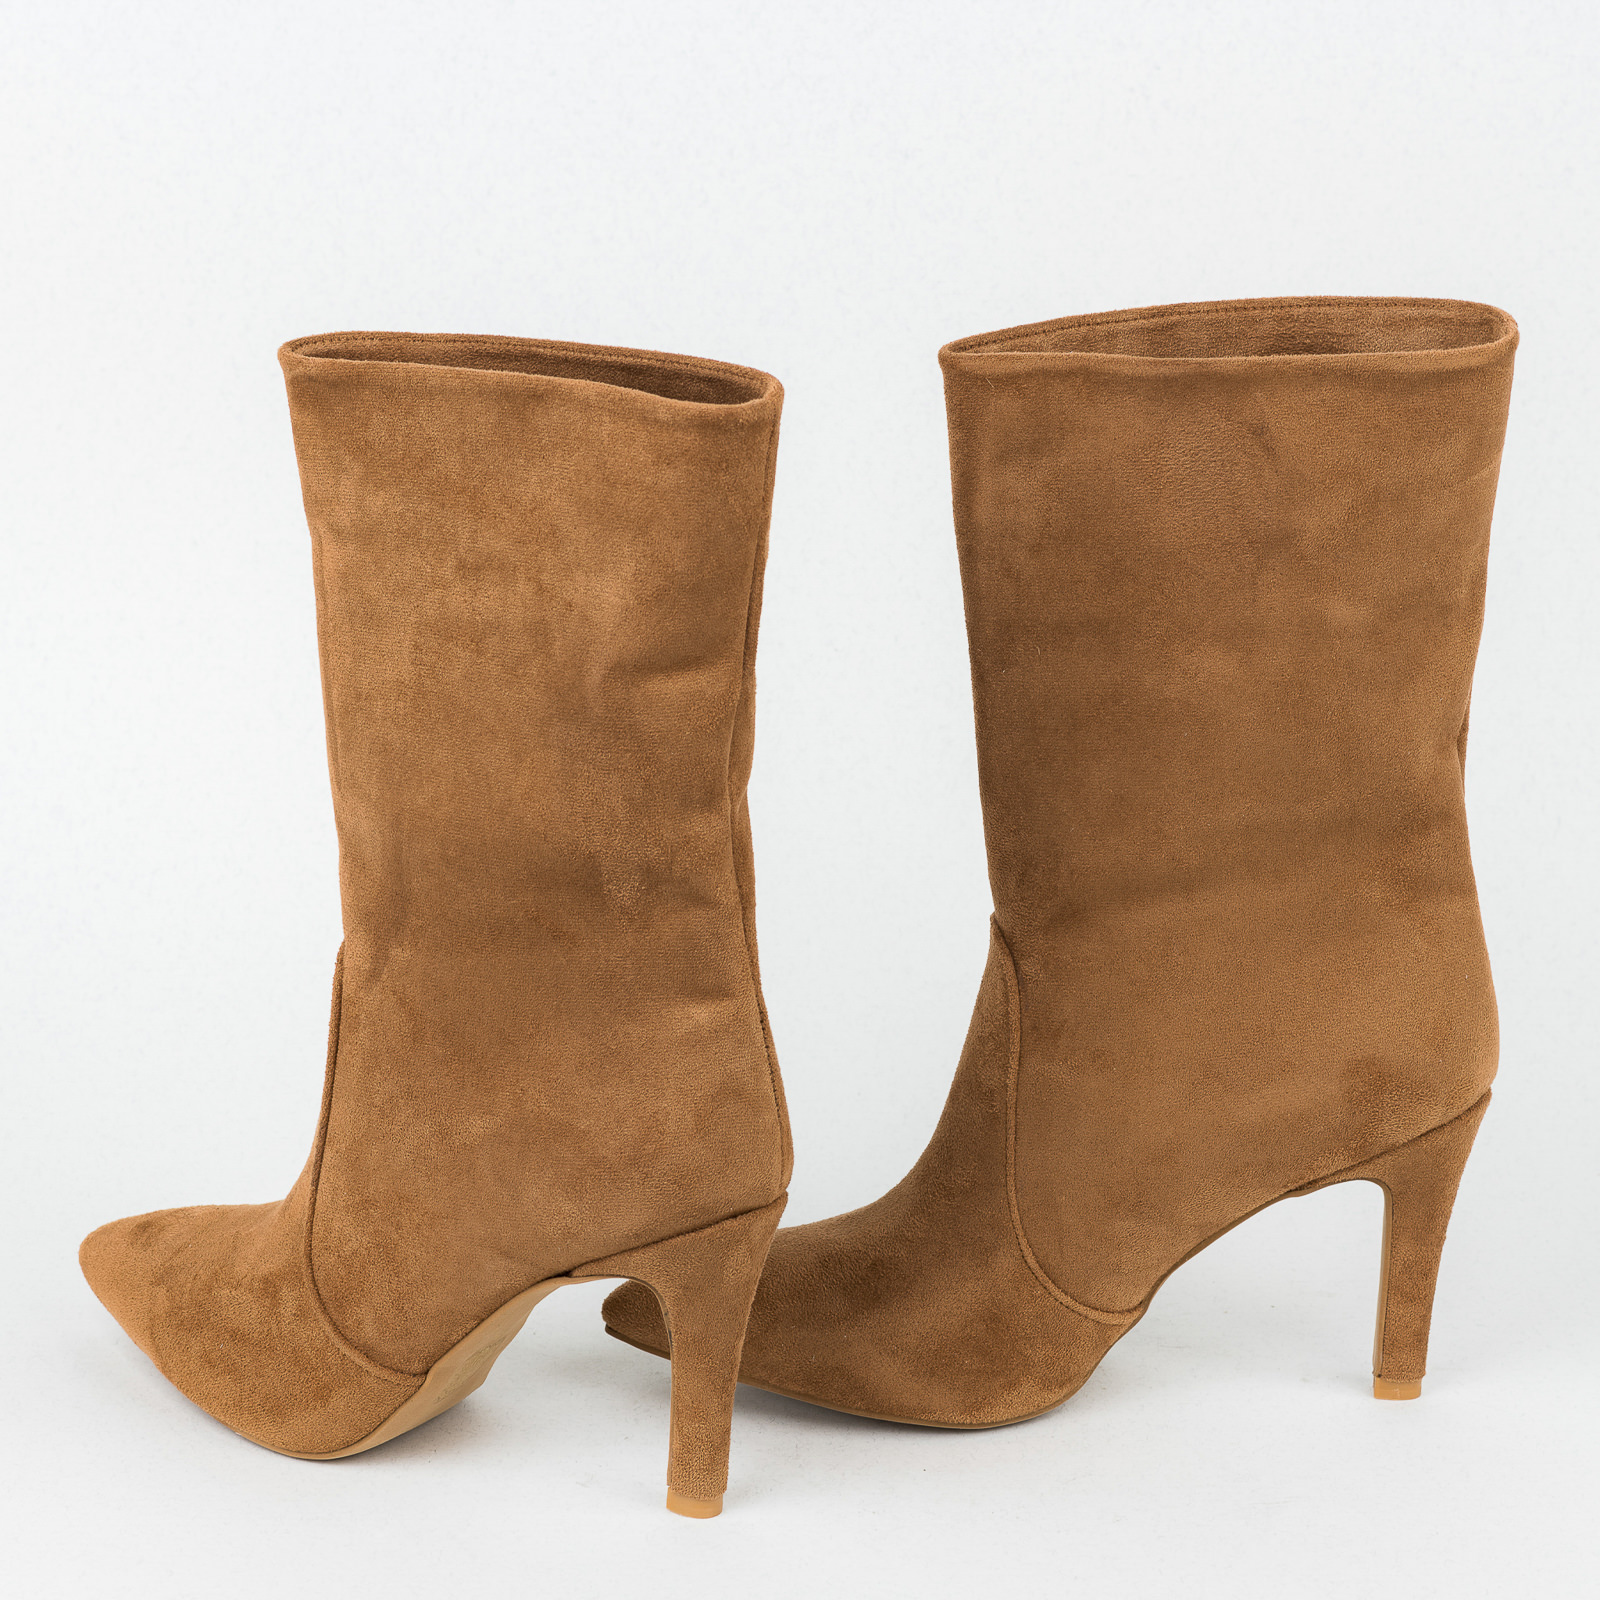 Women ankle boots B419 - BROWN